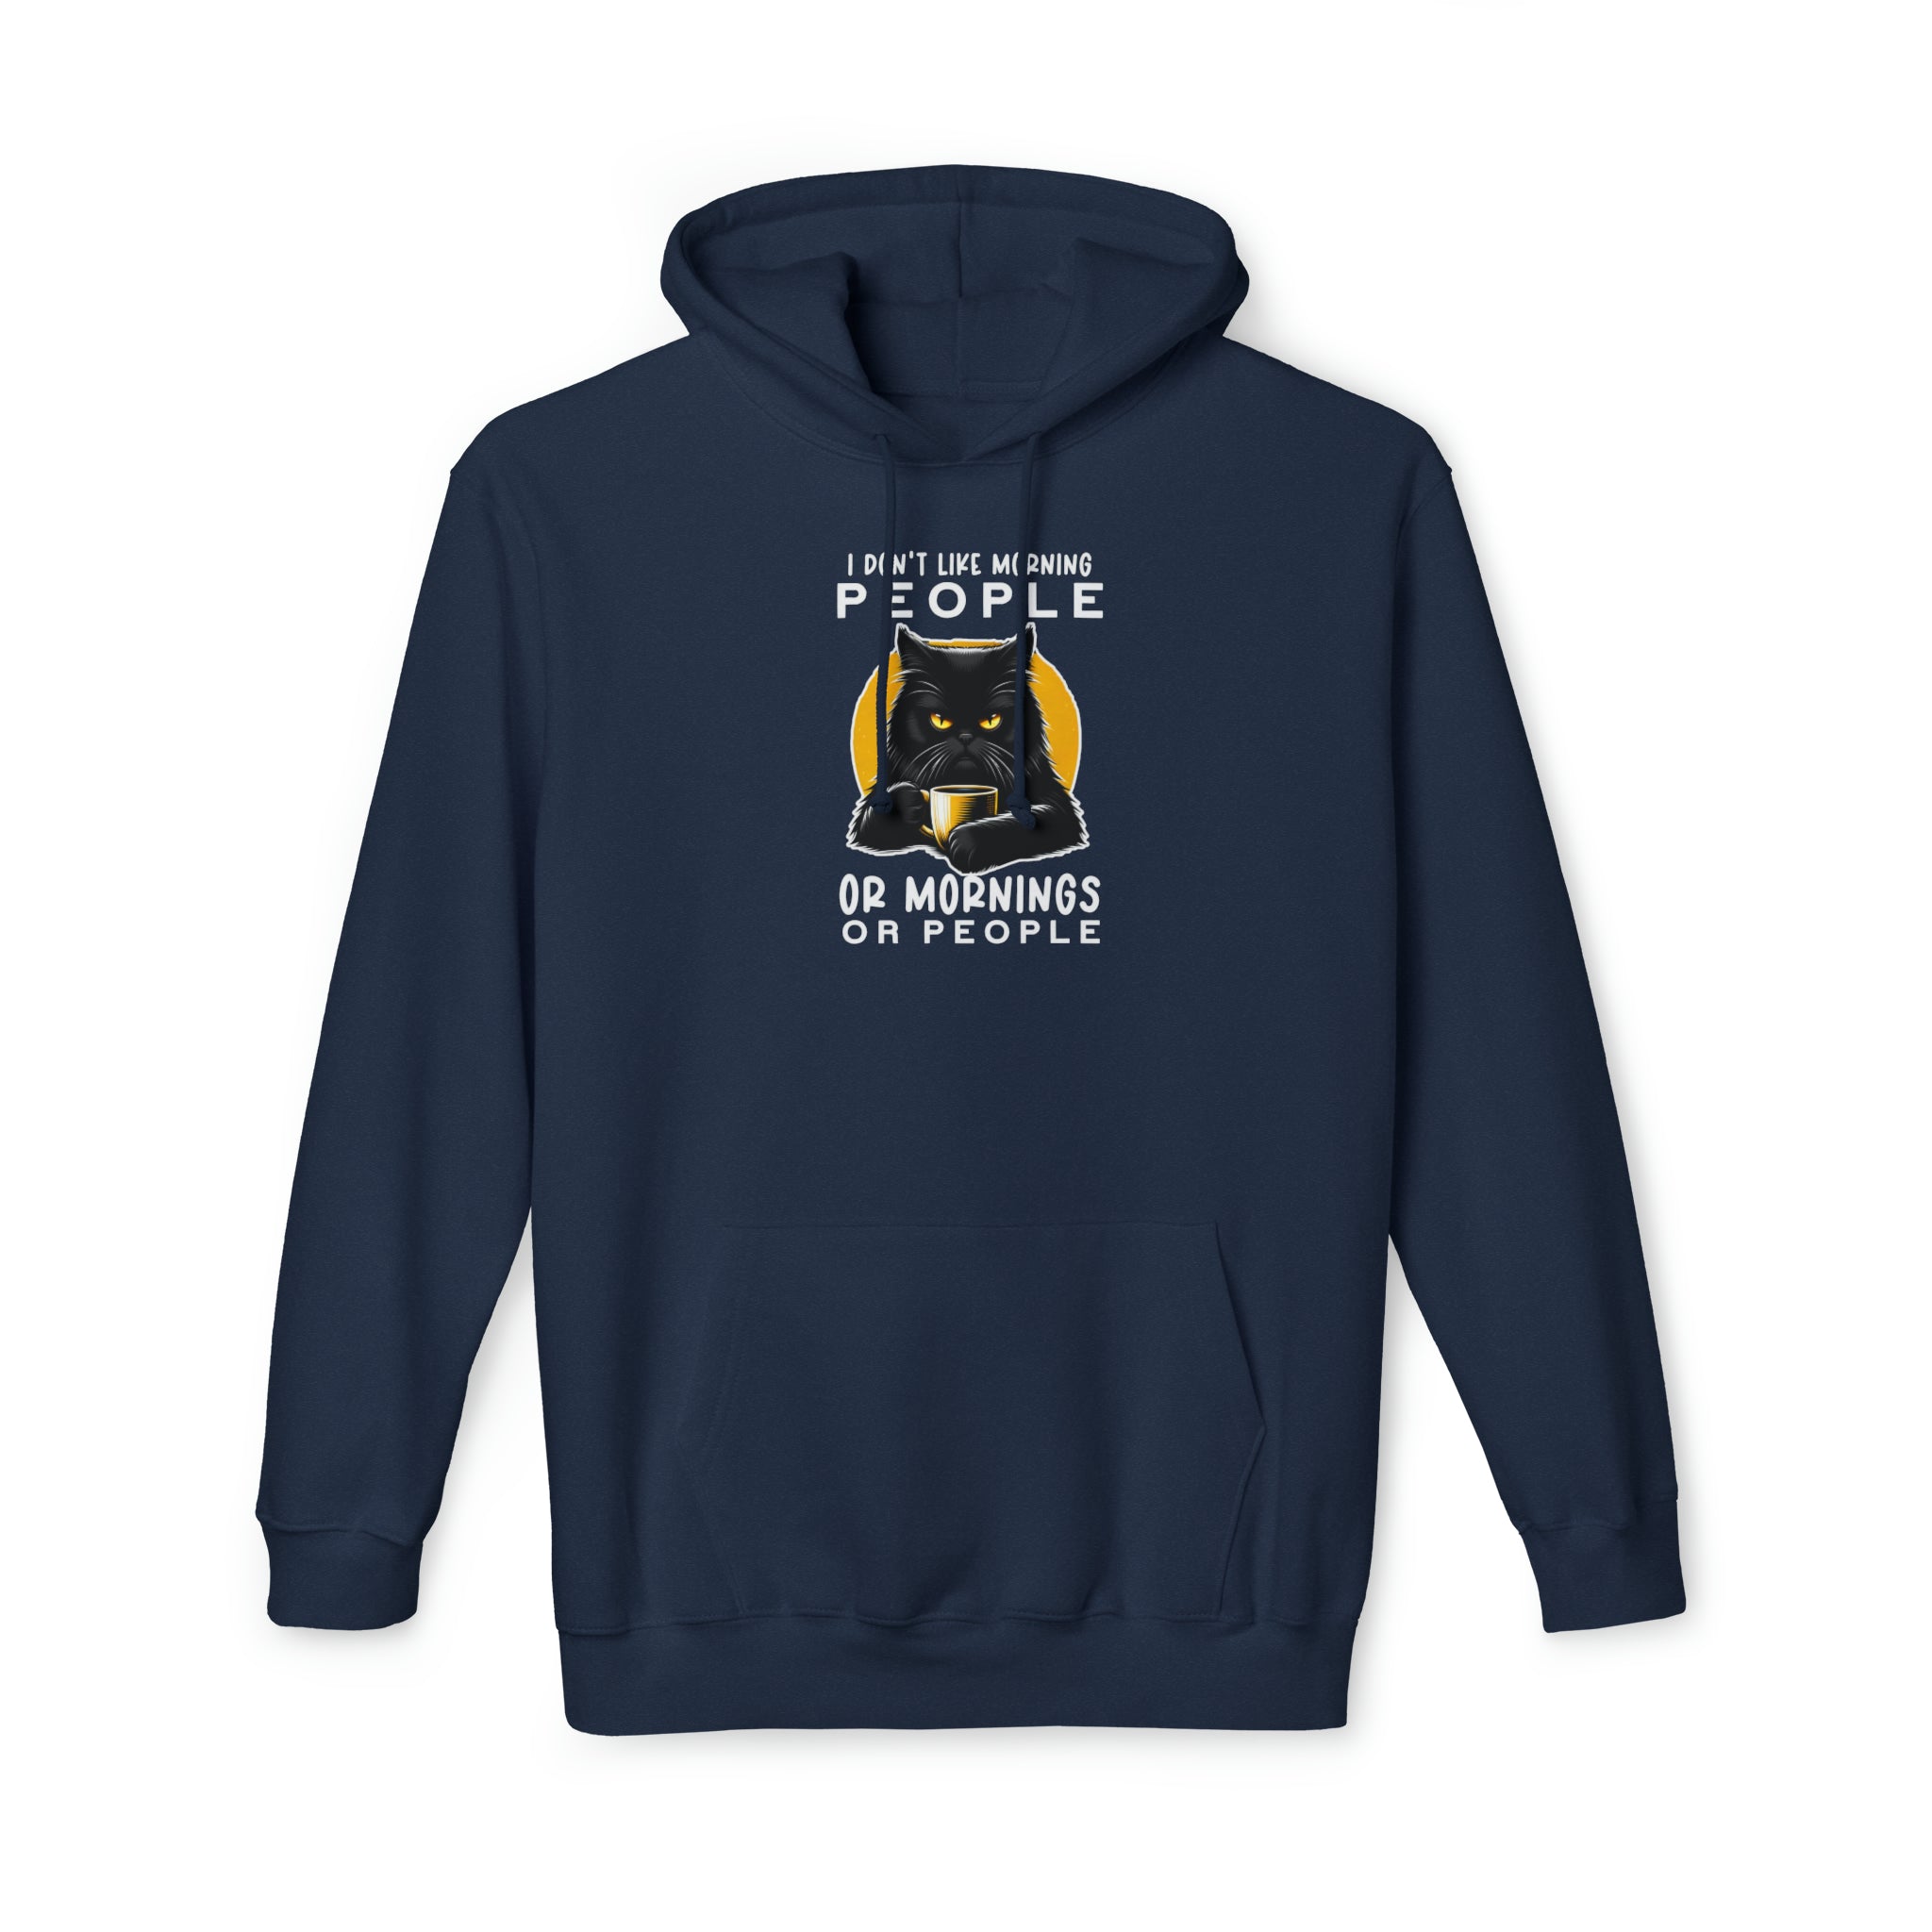 Morning Mood Master: 'I Don't Like People...Grumpy Cat Coffee' Women's Hooded Sweatshirt - American-Made Attitude for Your AM Ritual